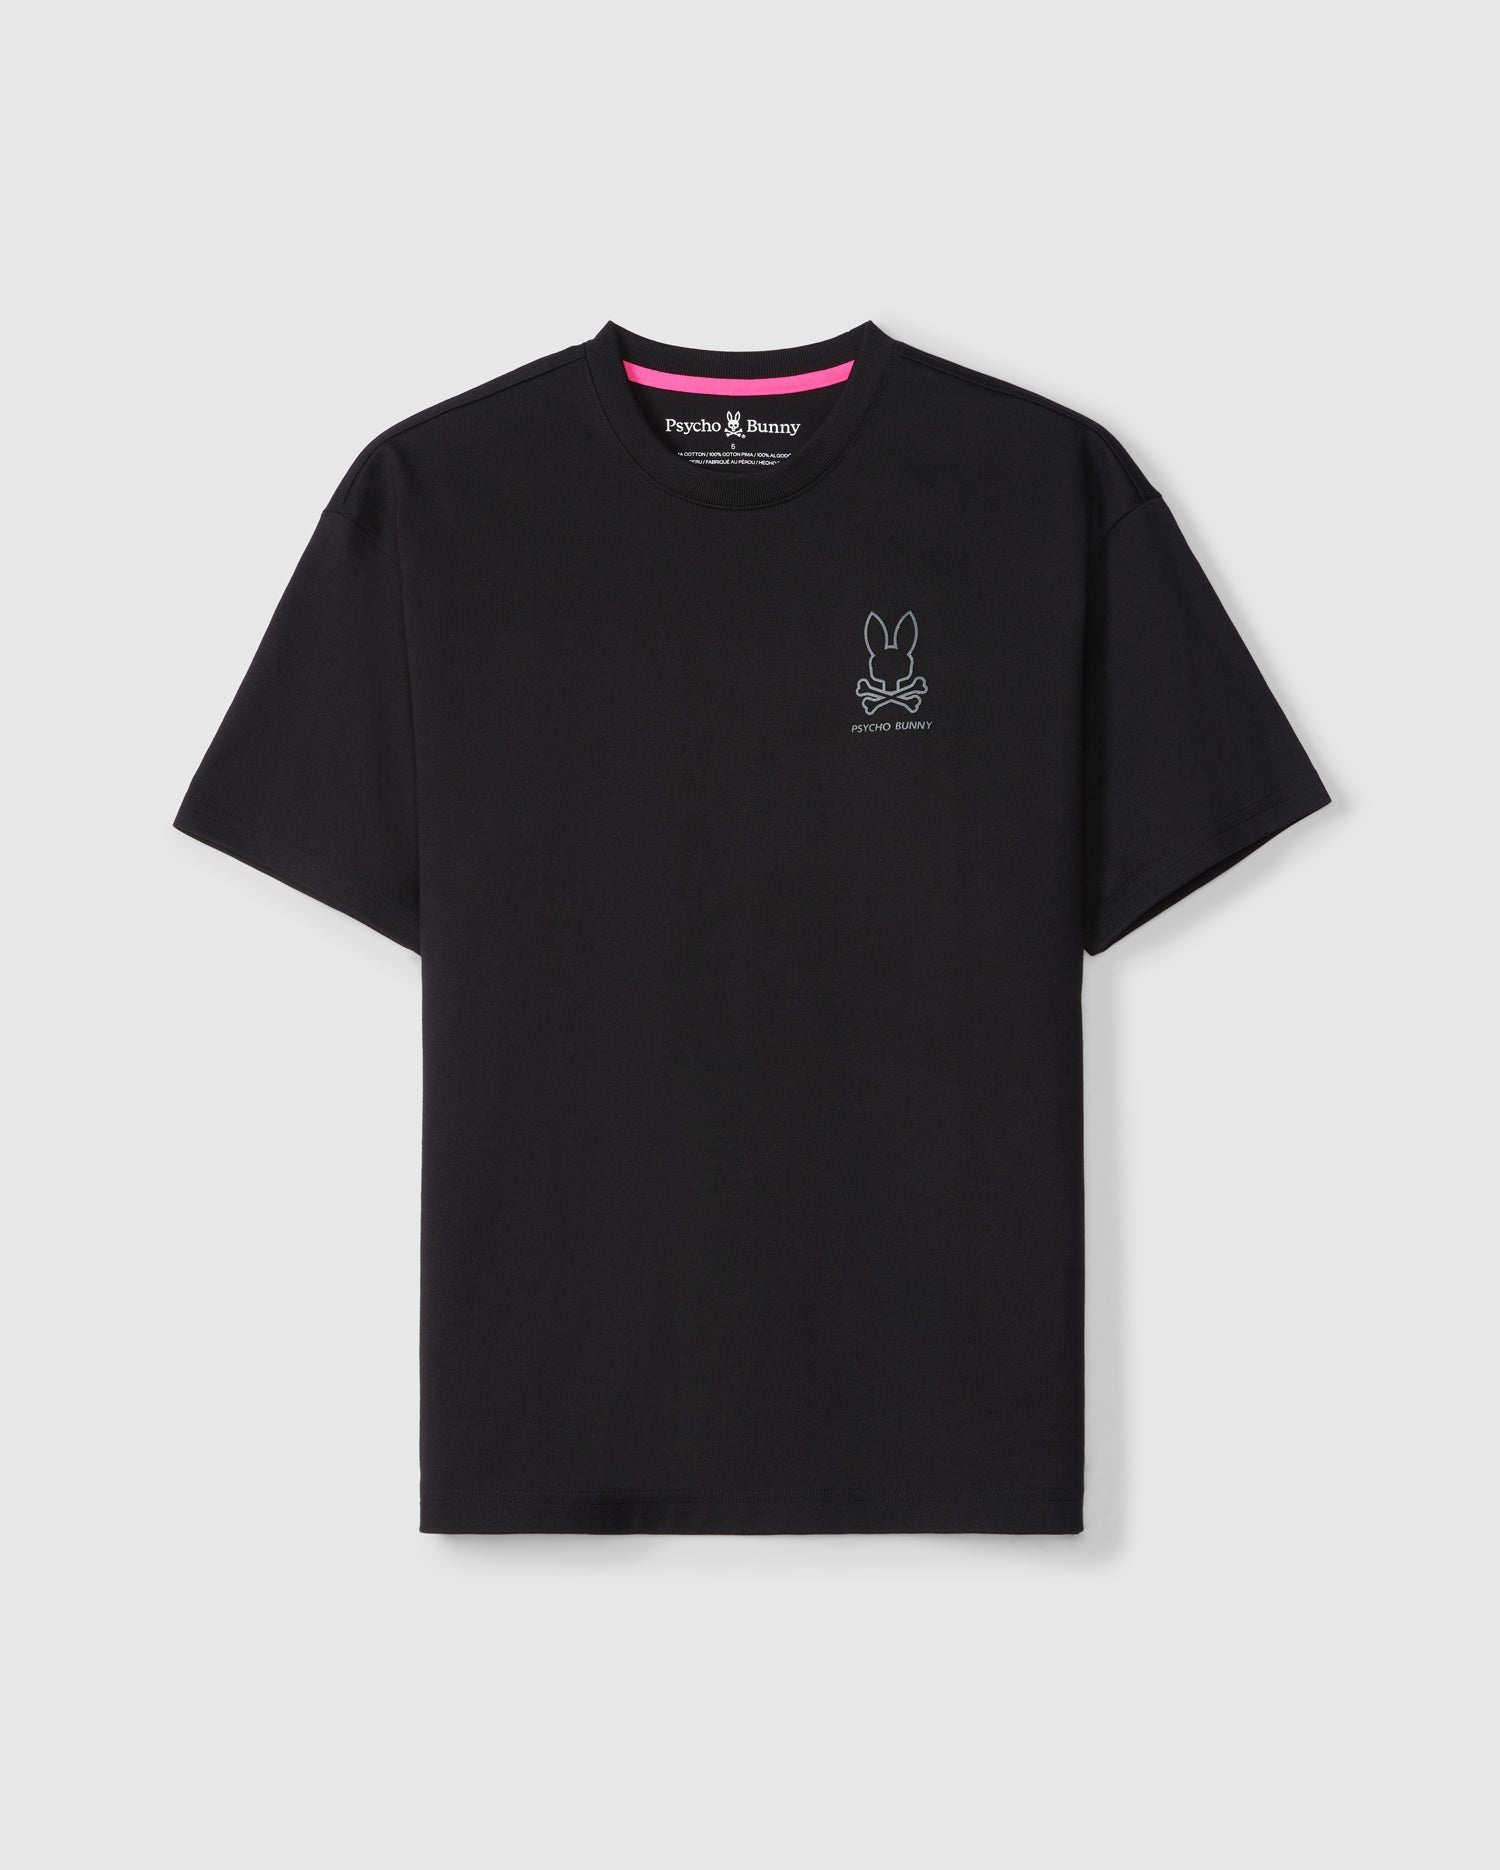 A black Pima cotton jersey t-shirt featuring a small white Bunny graphic on the left chest with 